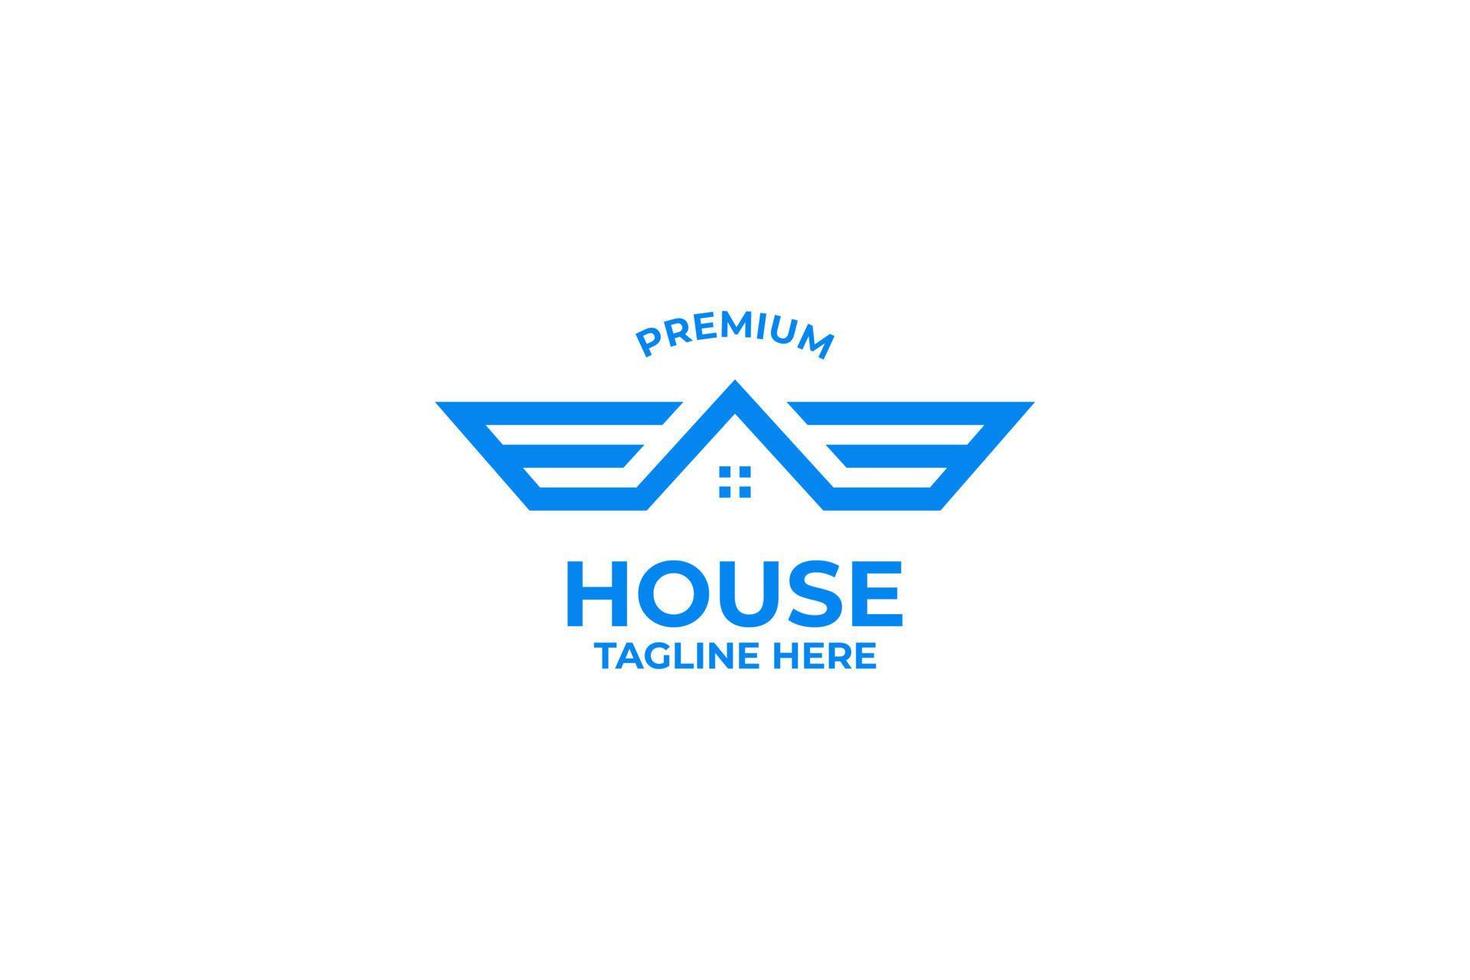 Flat minimalist house with wing icon logo vector illustration